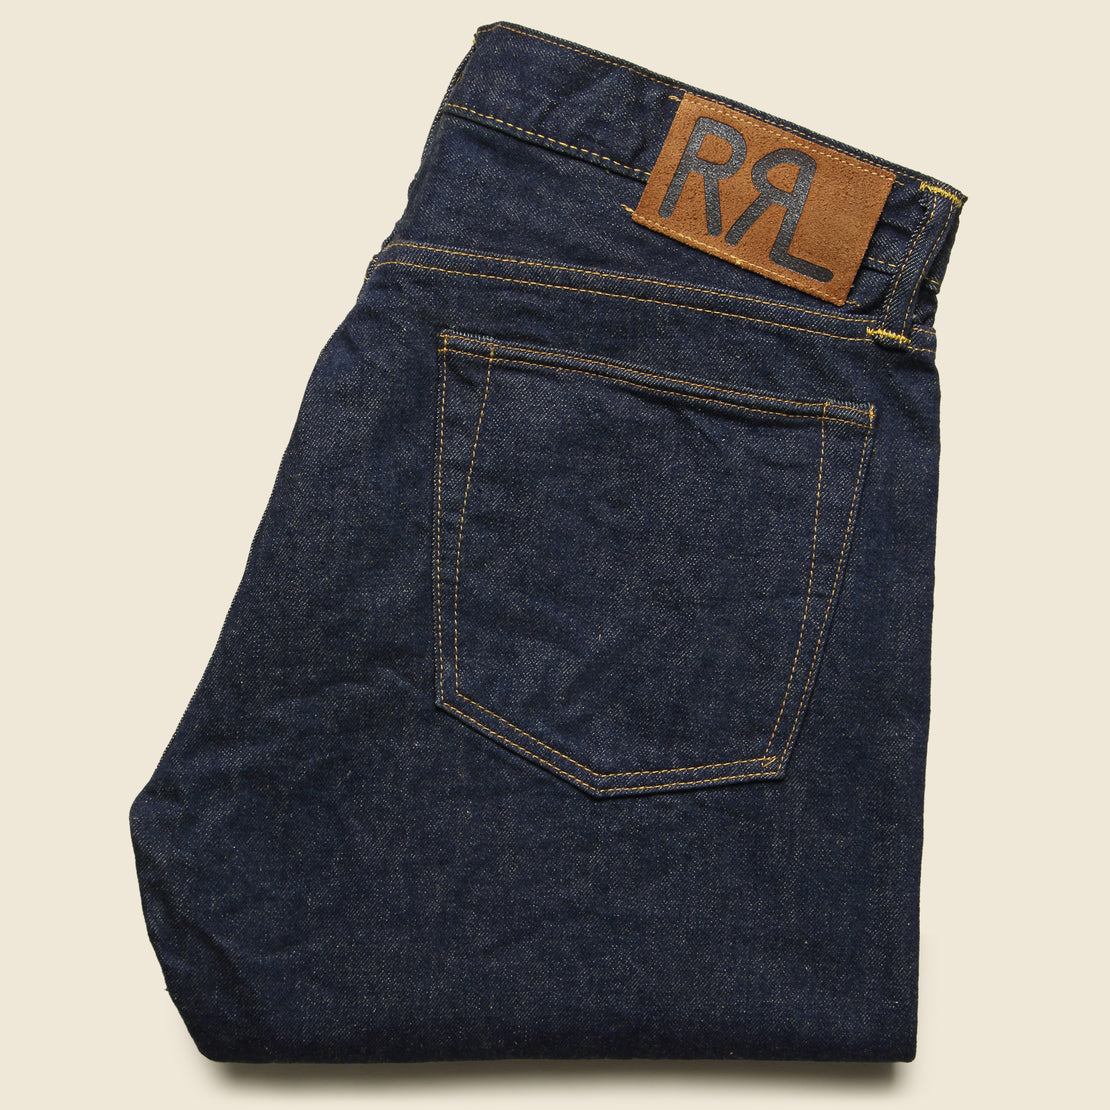 Slim Narrow Jean - Once Washed - RRL - STAG Provisions - Pants - Denim